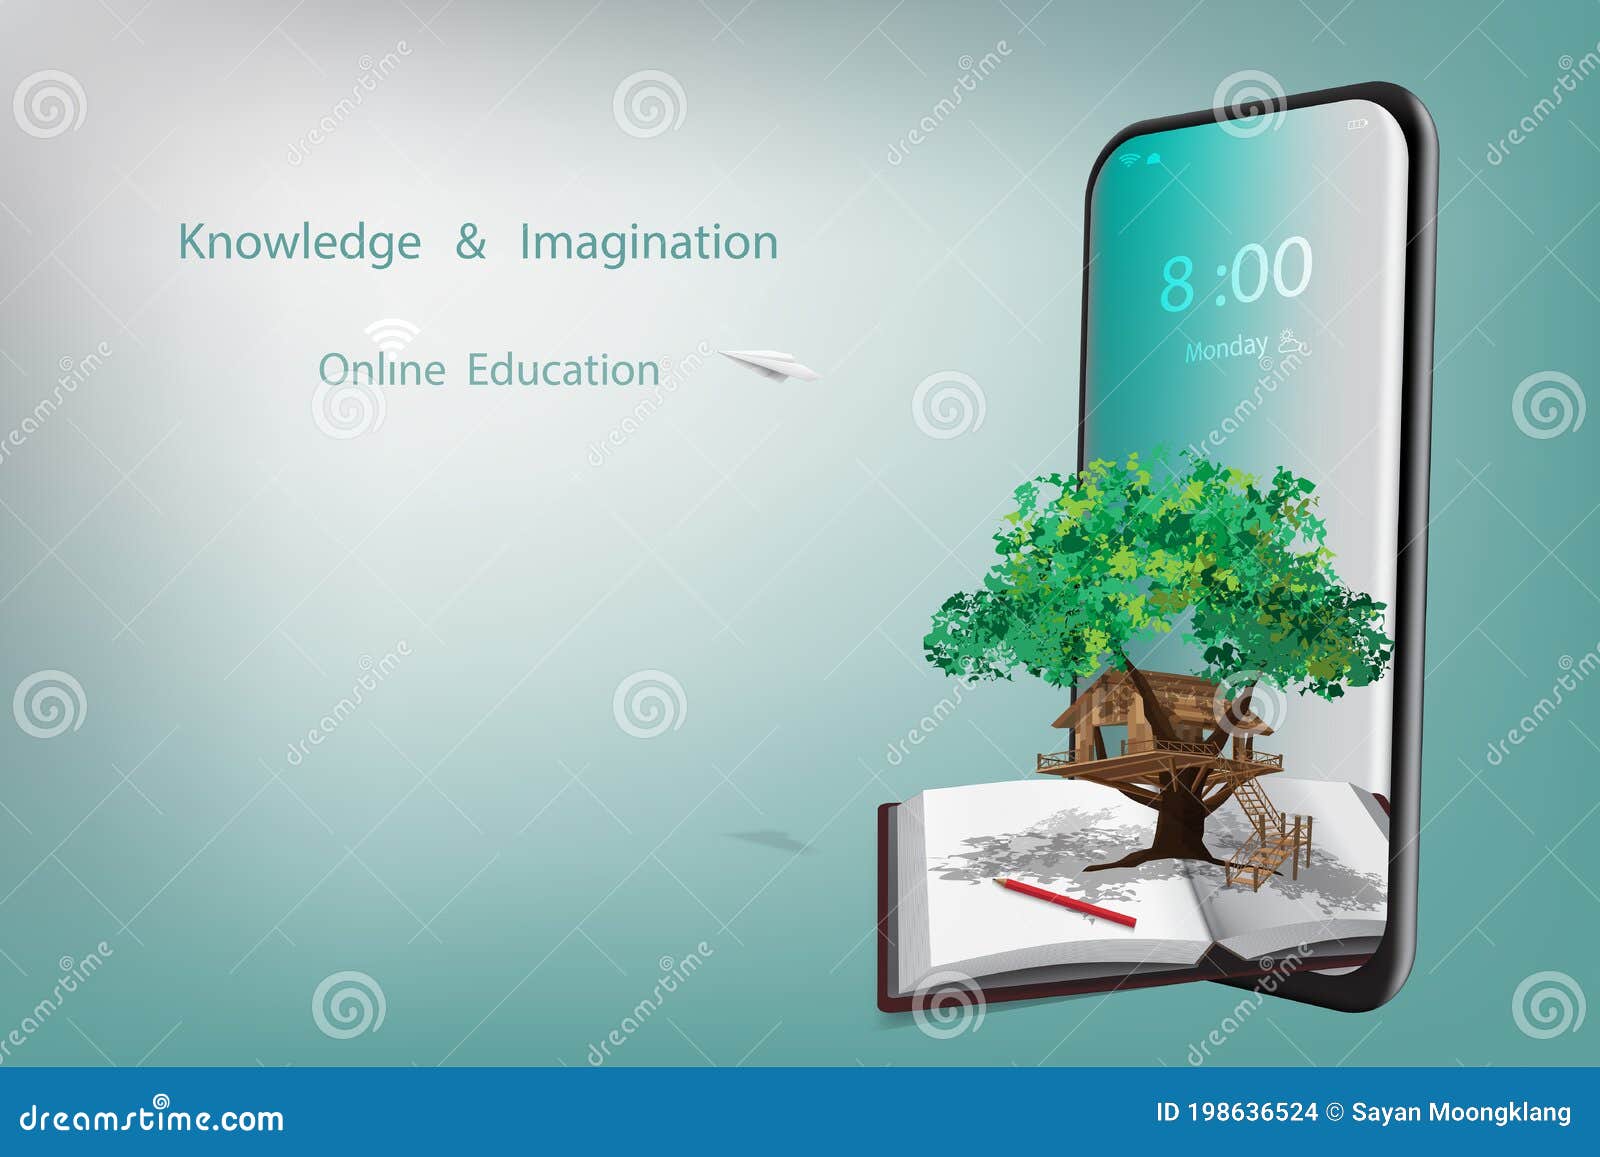 Education Mobile Wallpapers, HD Education Backgrounds, Free Images Download